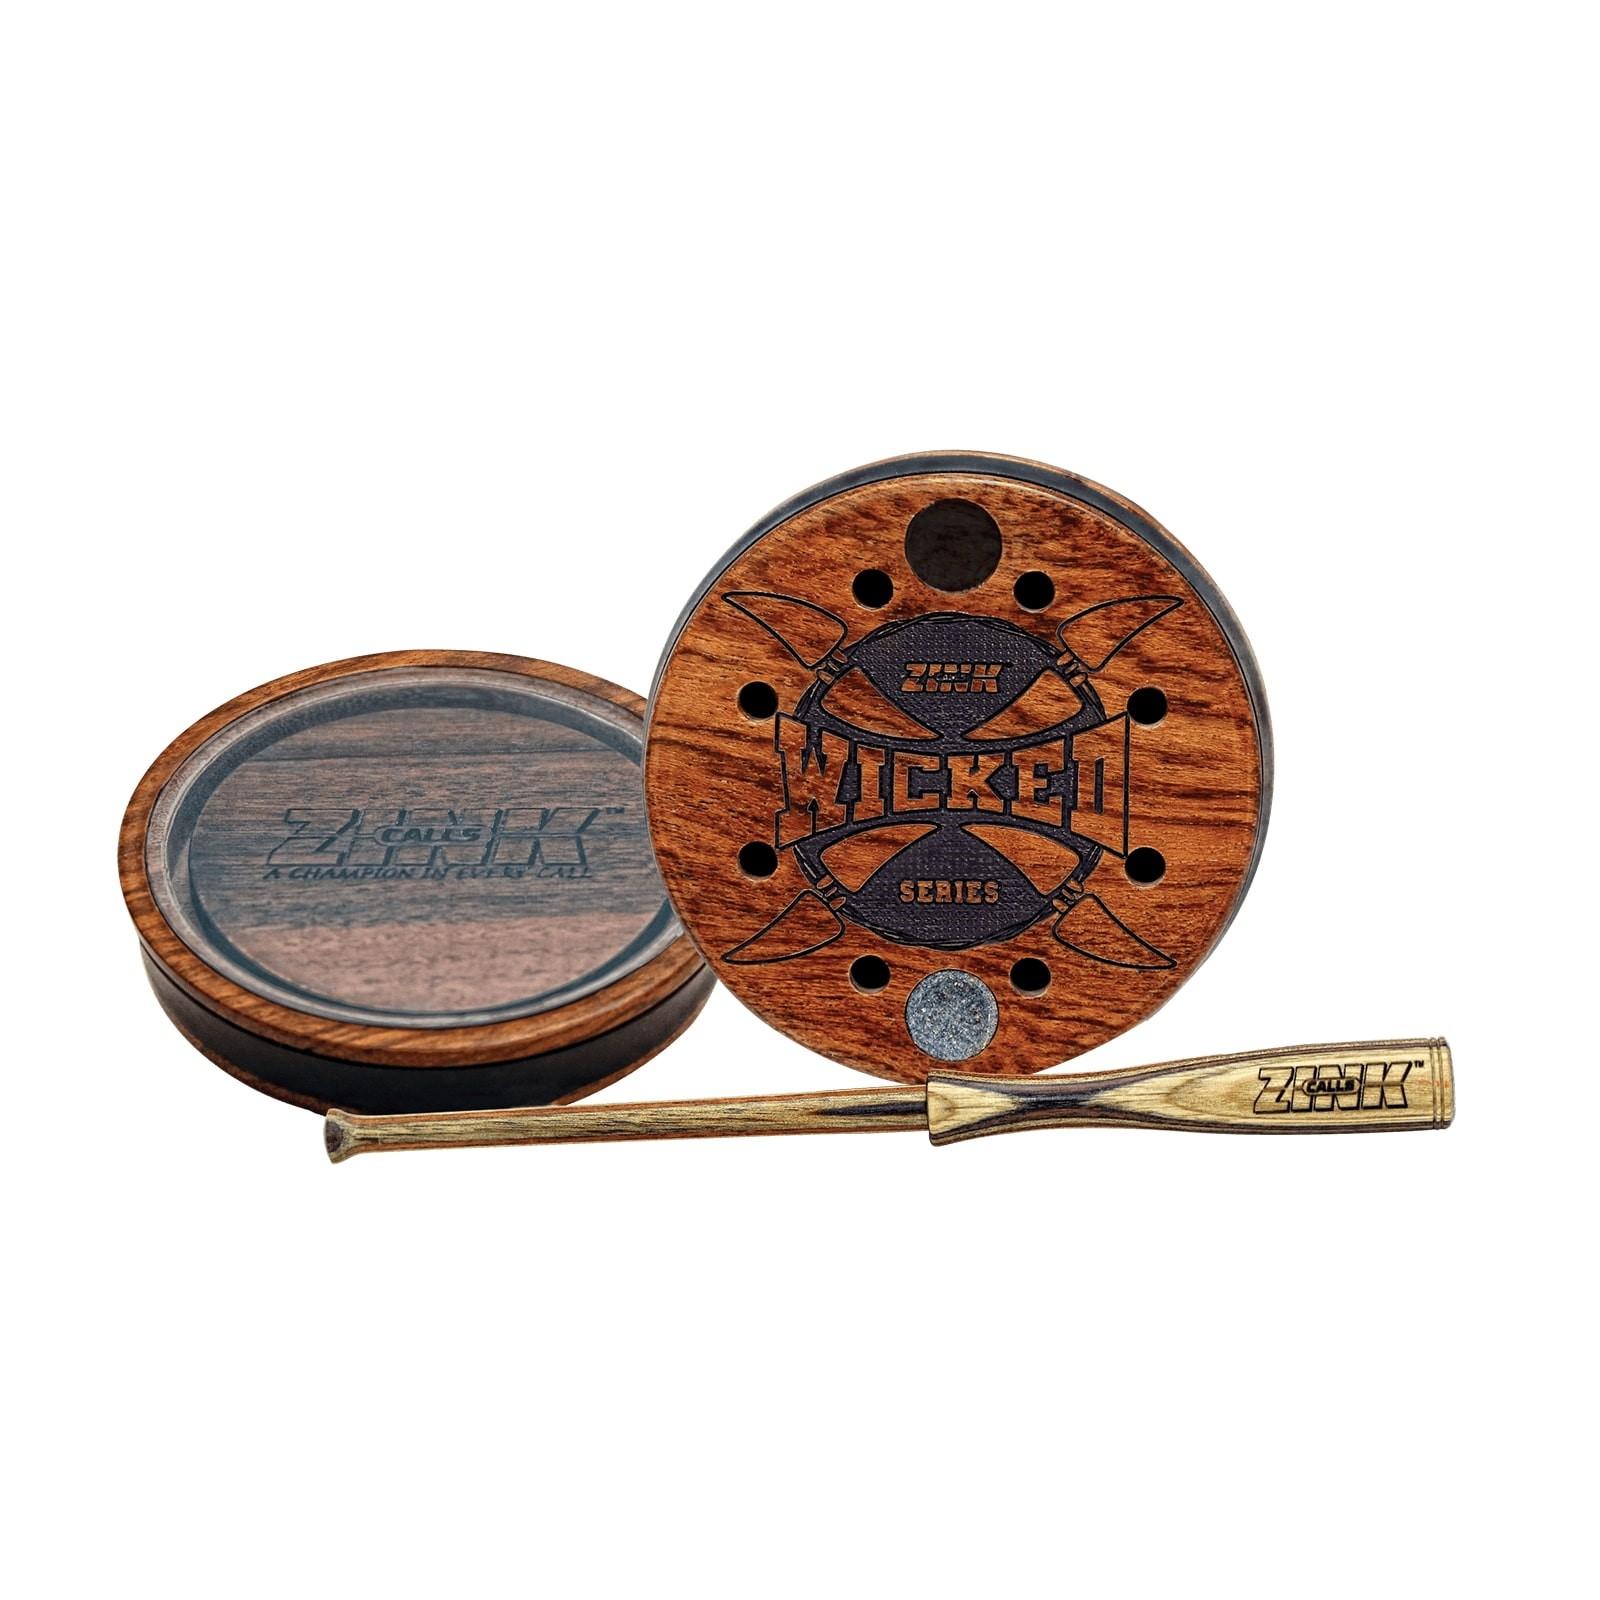 Zink Wicked Series Pot Call Crystal